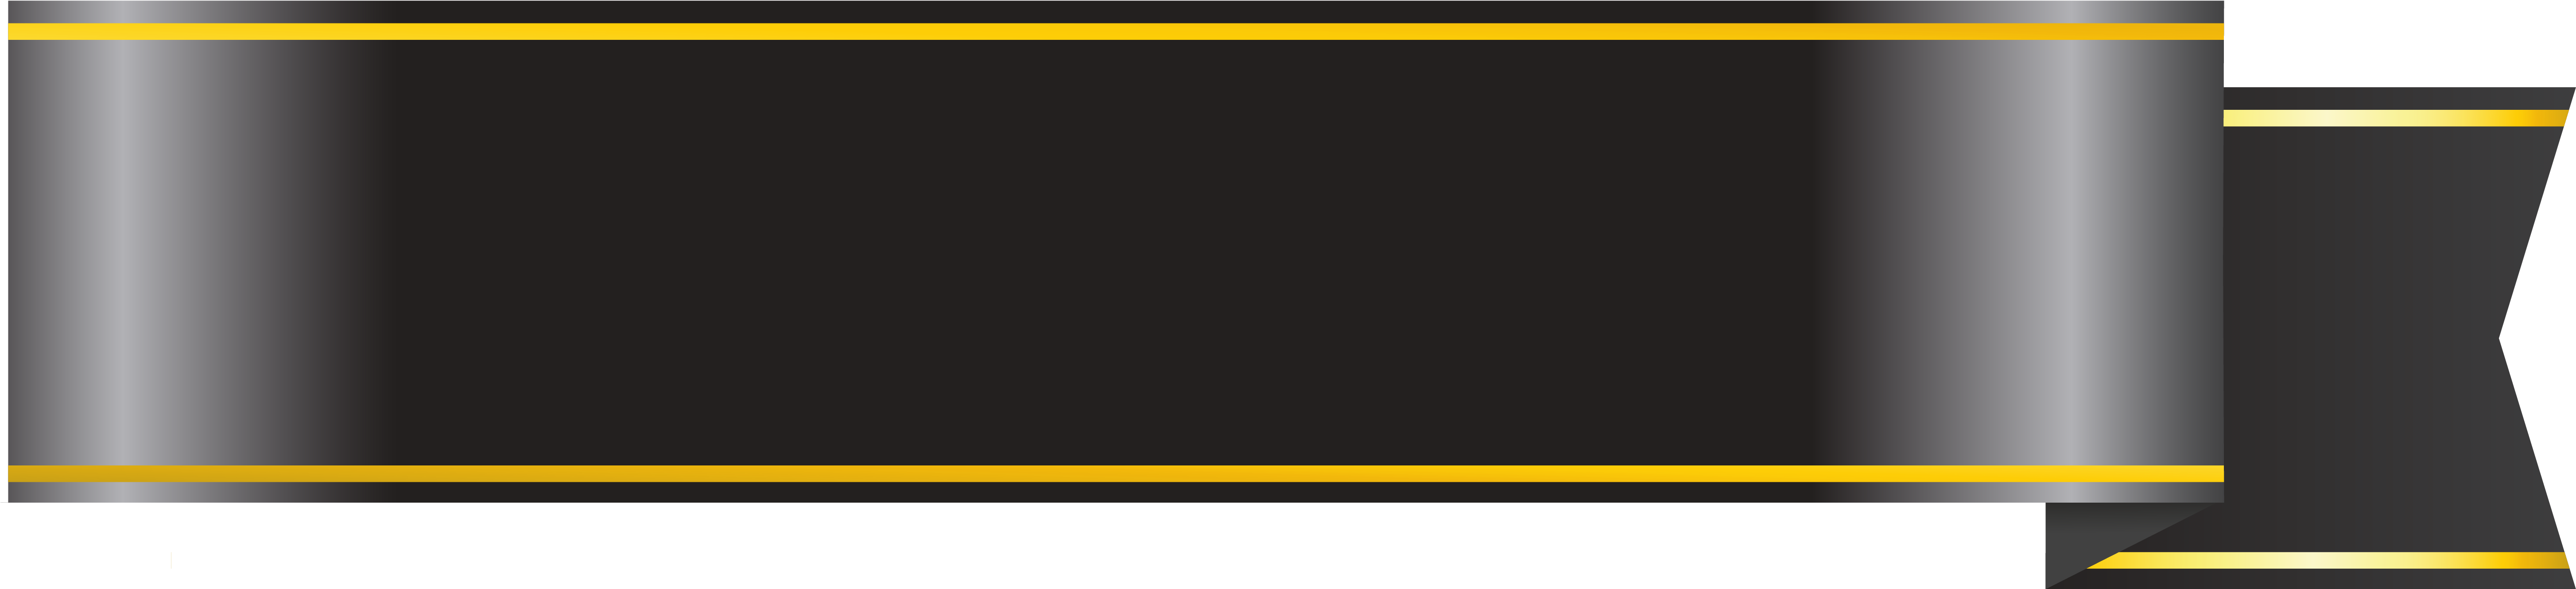 A Black And Yellow Rectangle With A Black Background